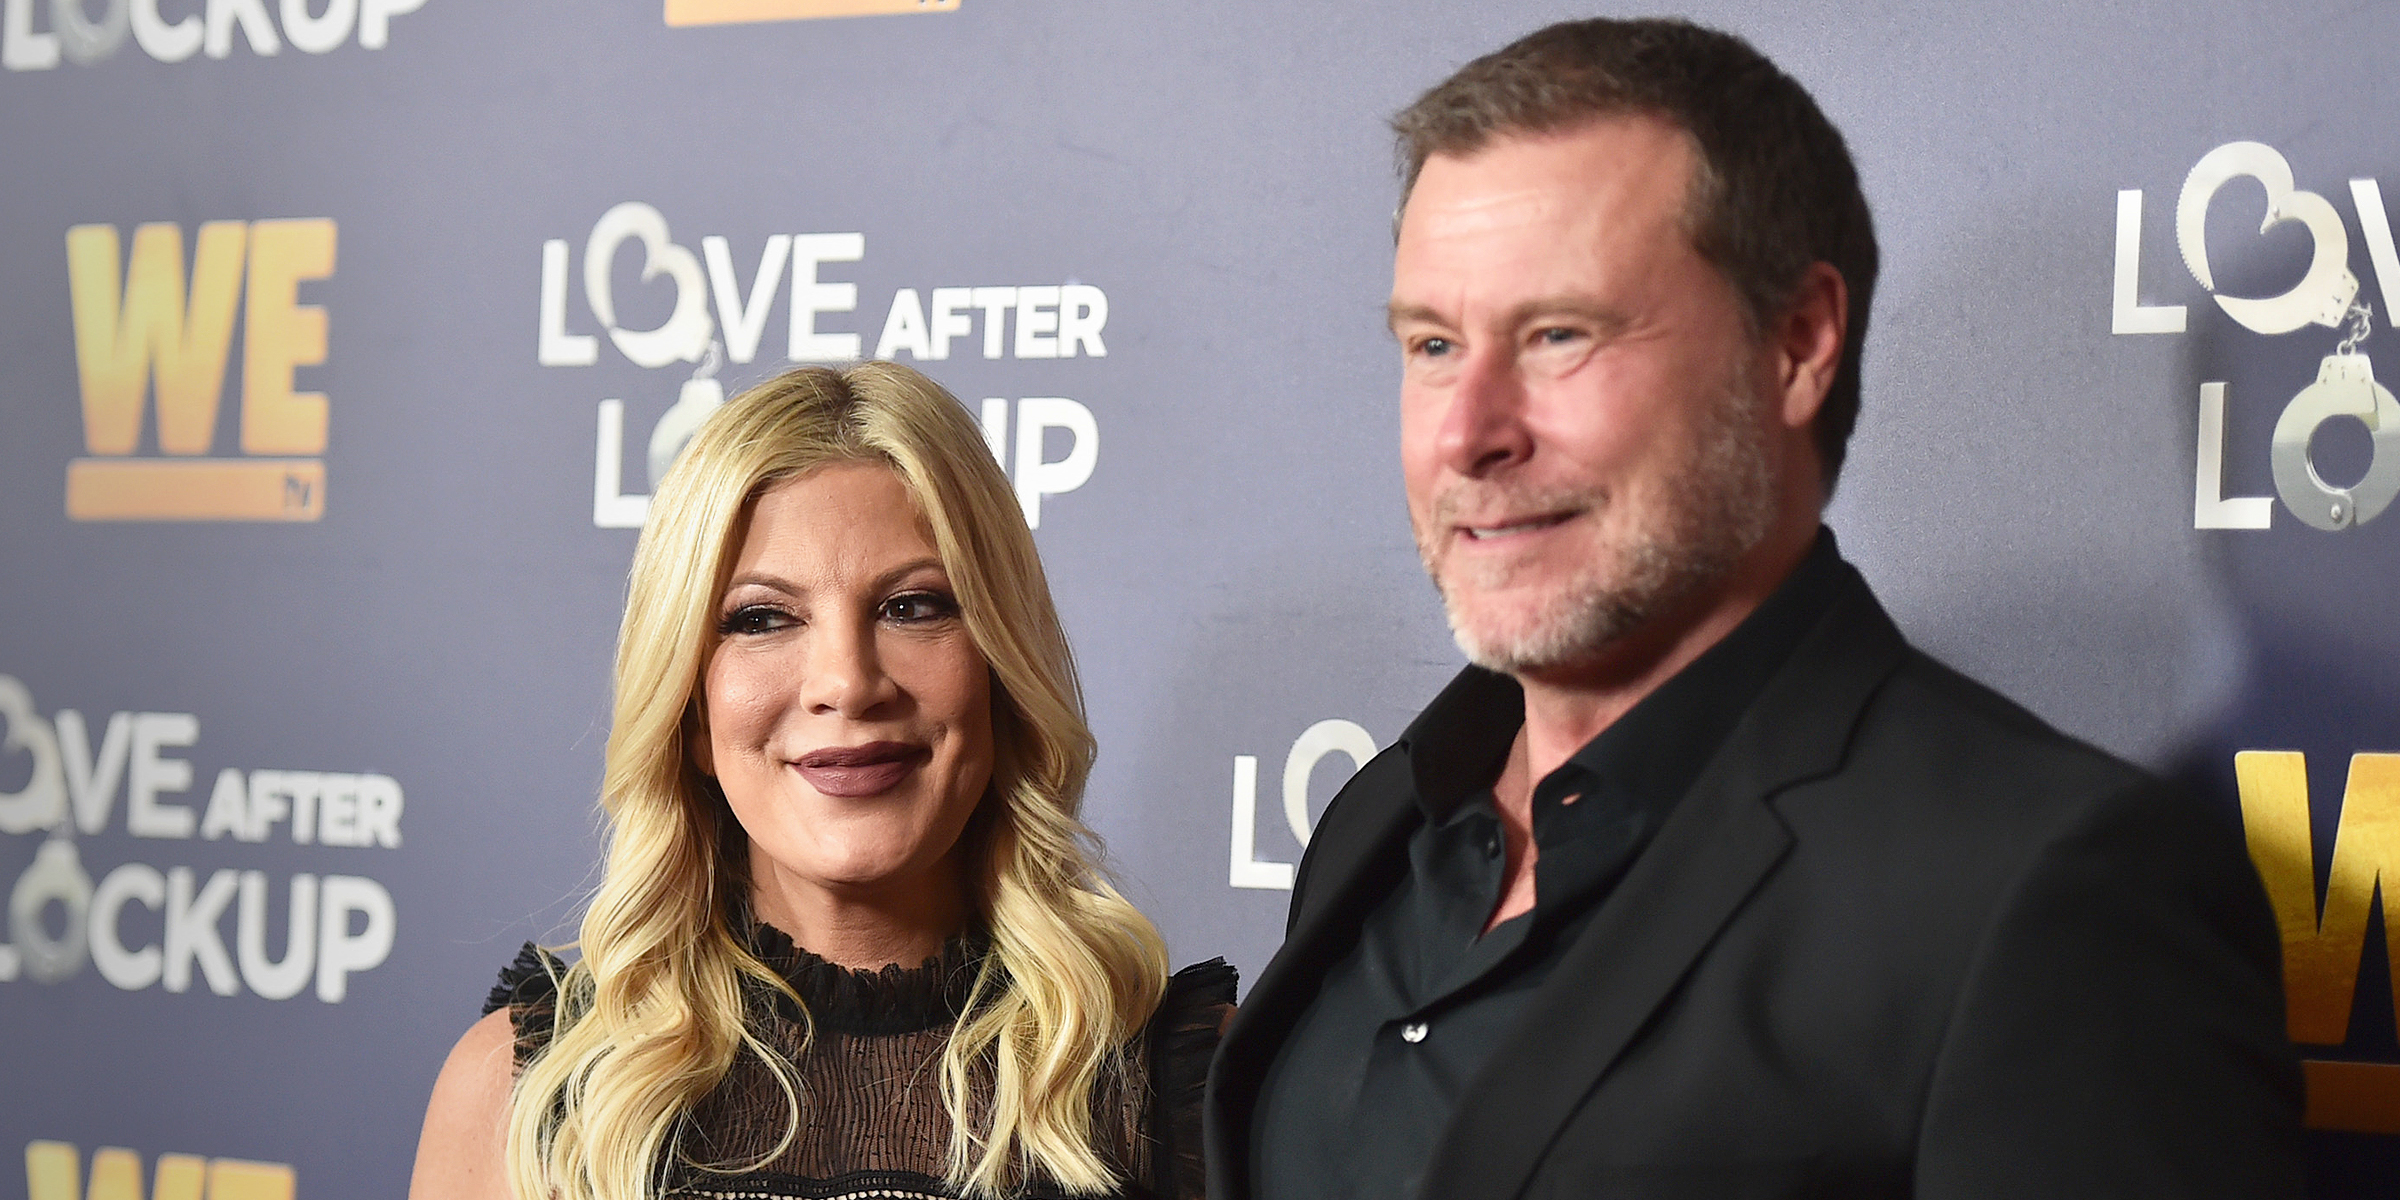 Tori Spelling and Dean McDermott | Source: Getty images